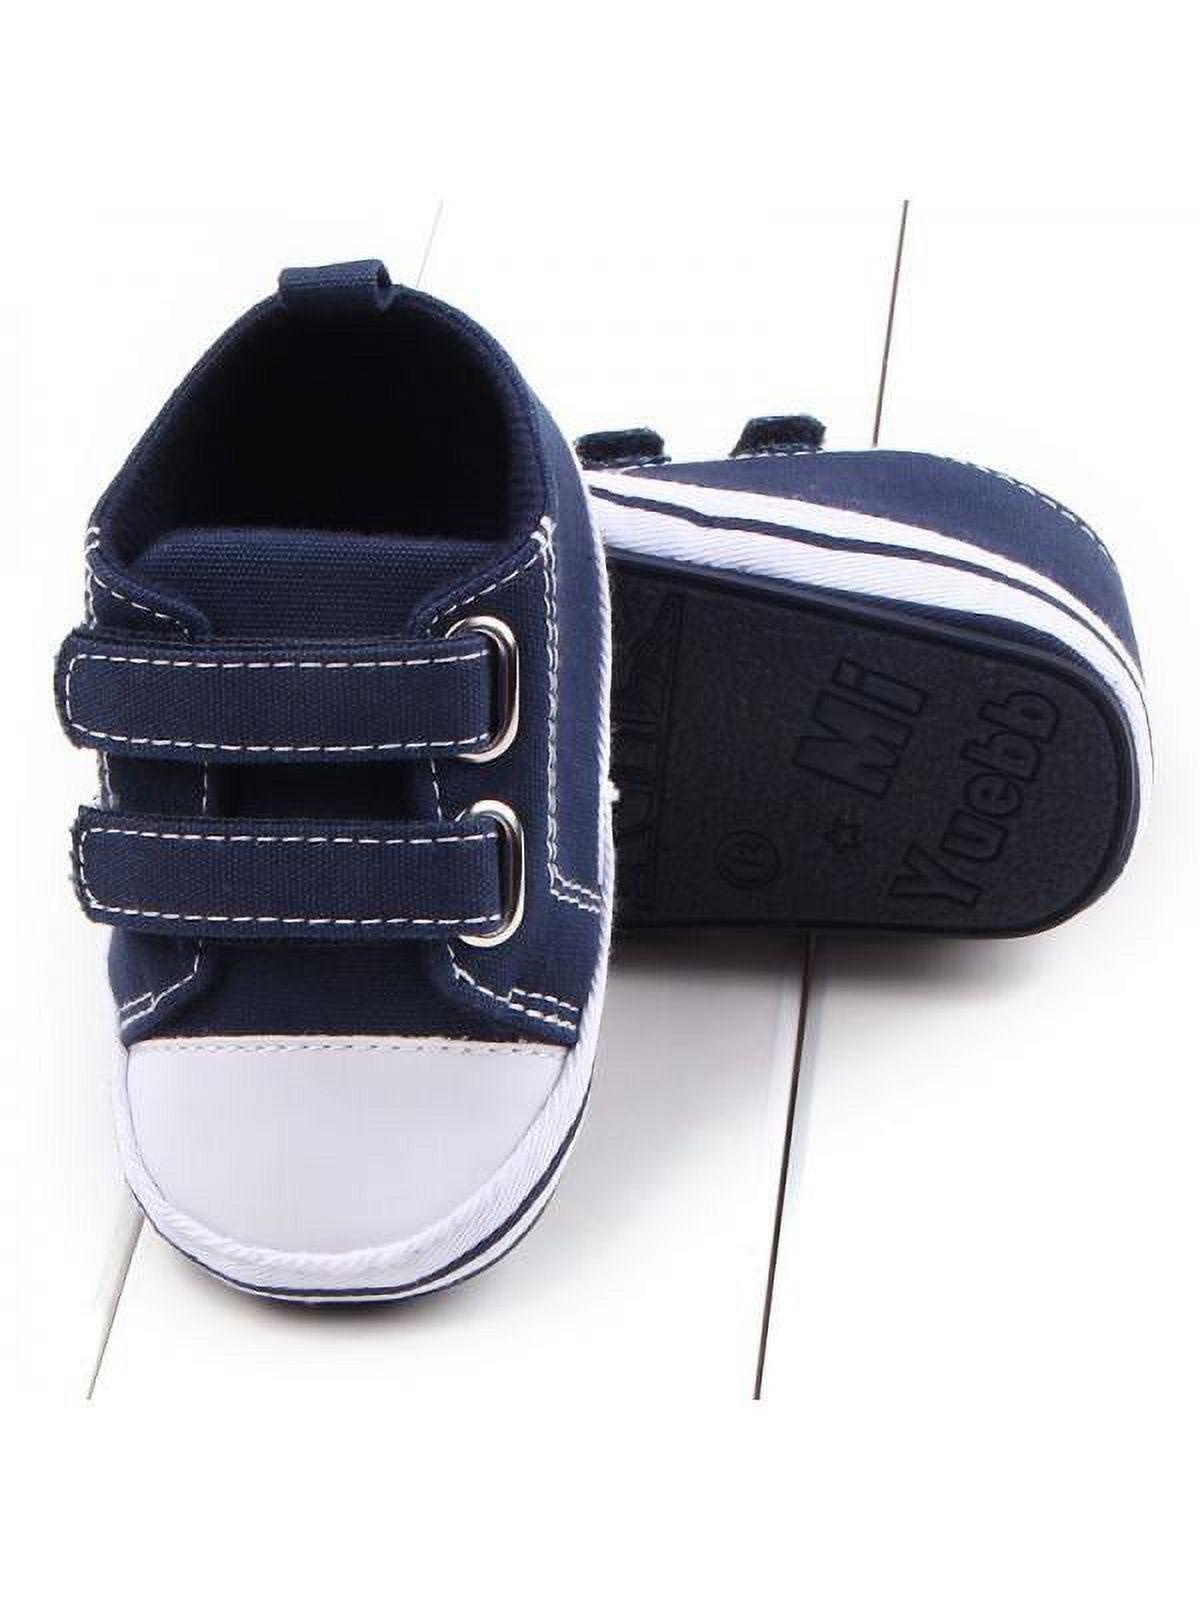 Infant Toddler Baby Boys Girls Soft Sole Crib Shoes Sneaker Newborn 0-27 Months - image 5 of 9